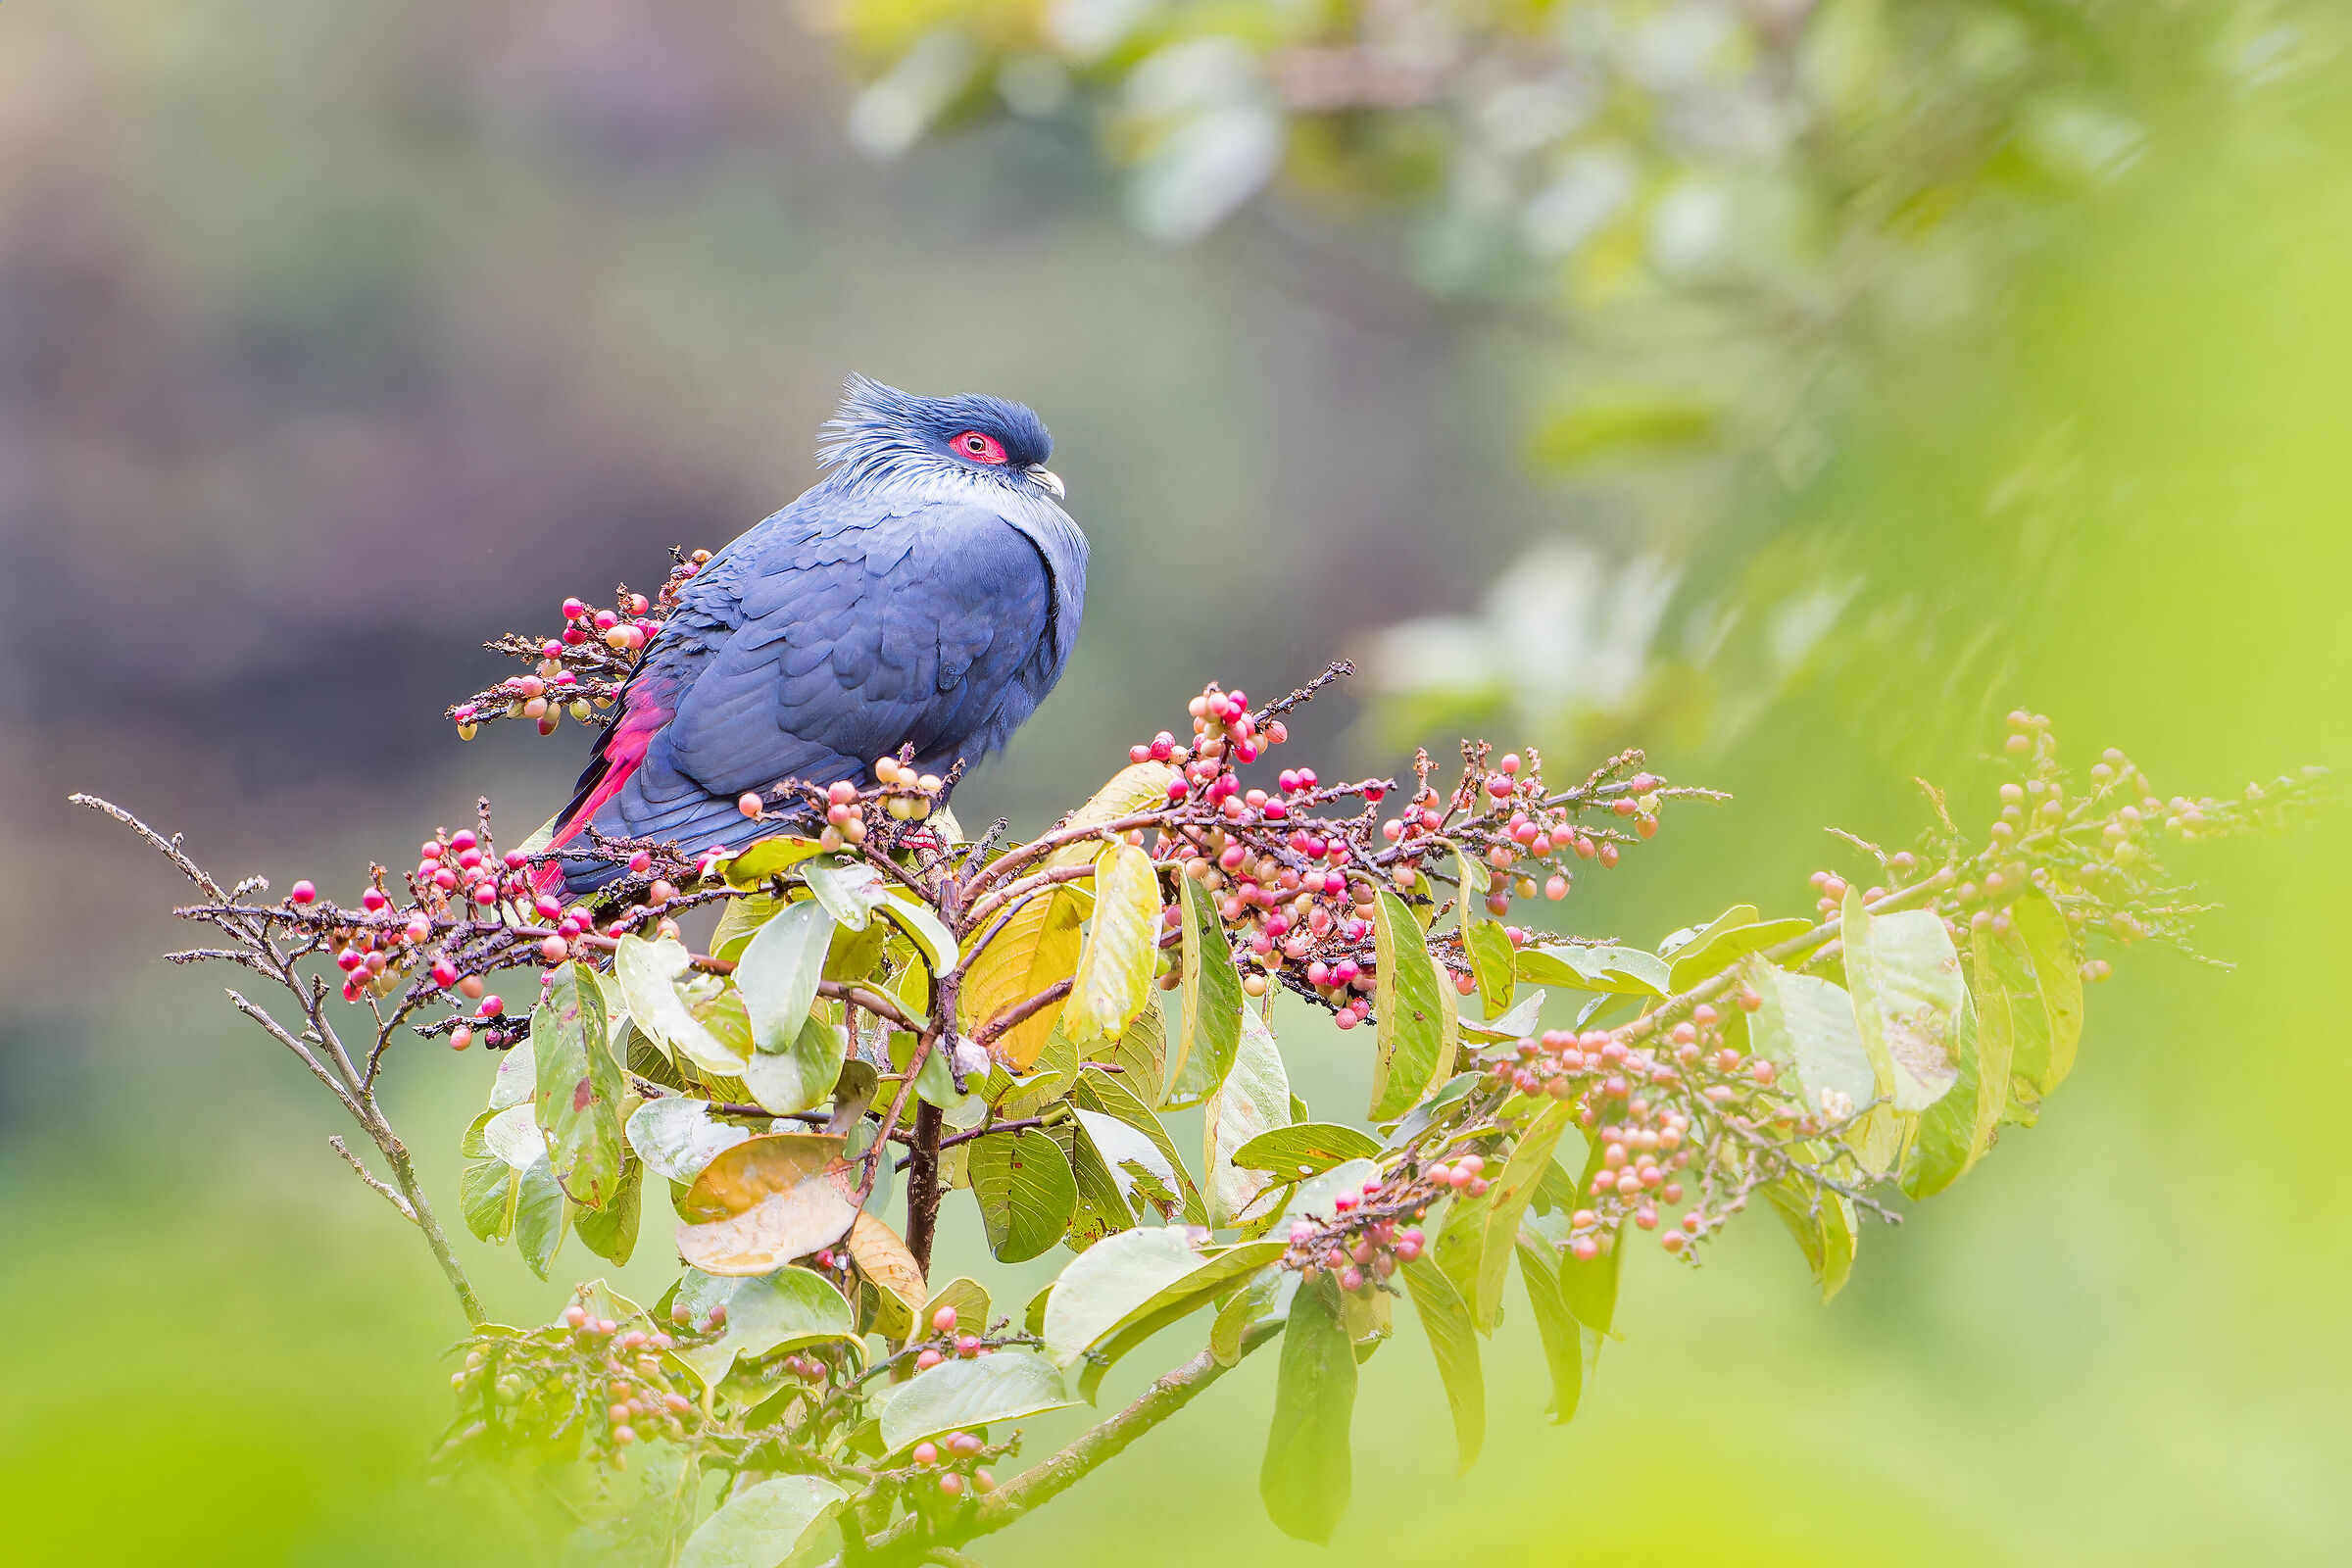 Blue pigeon from Madagascar...